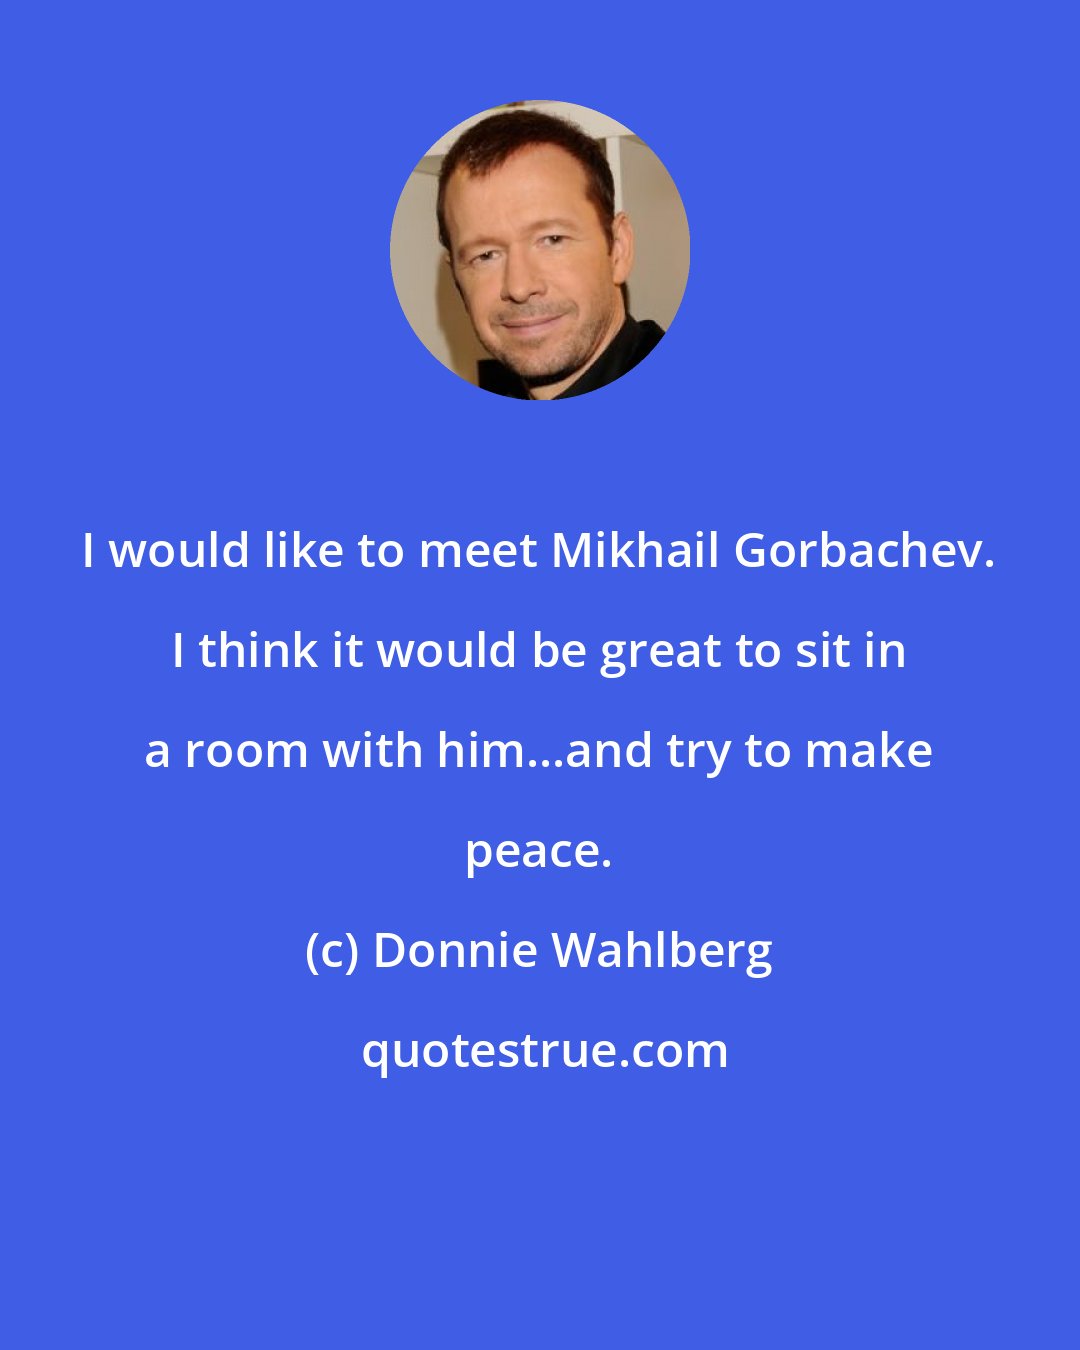 Donnie Wahlberg: I would like to meet Mikhail Gorbachev. I think it would be great to sit in a room with him...and try to make peace.